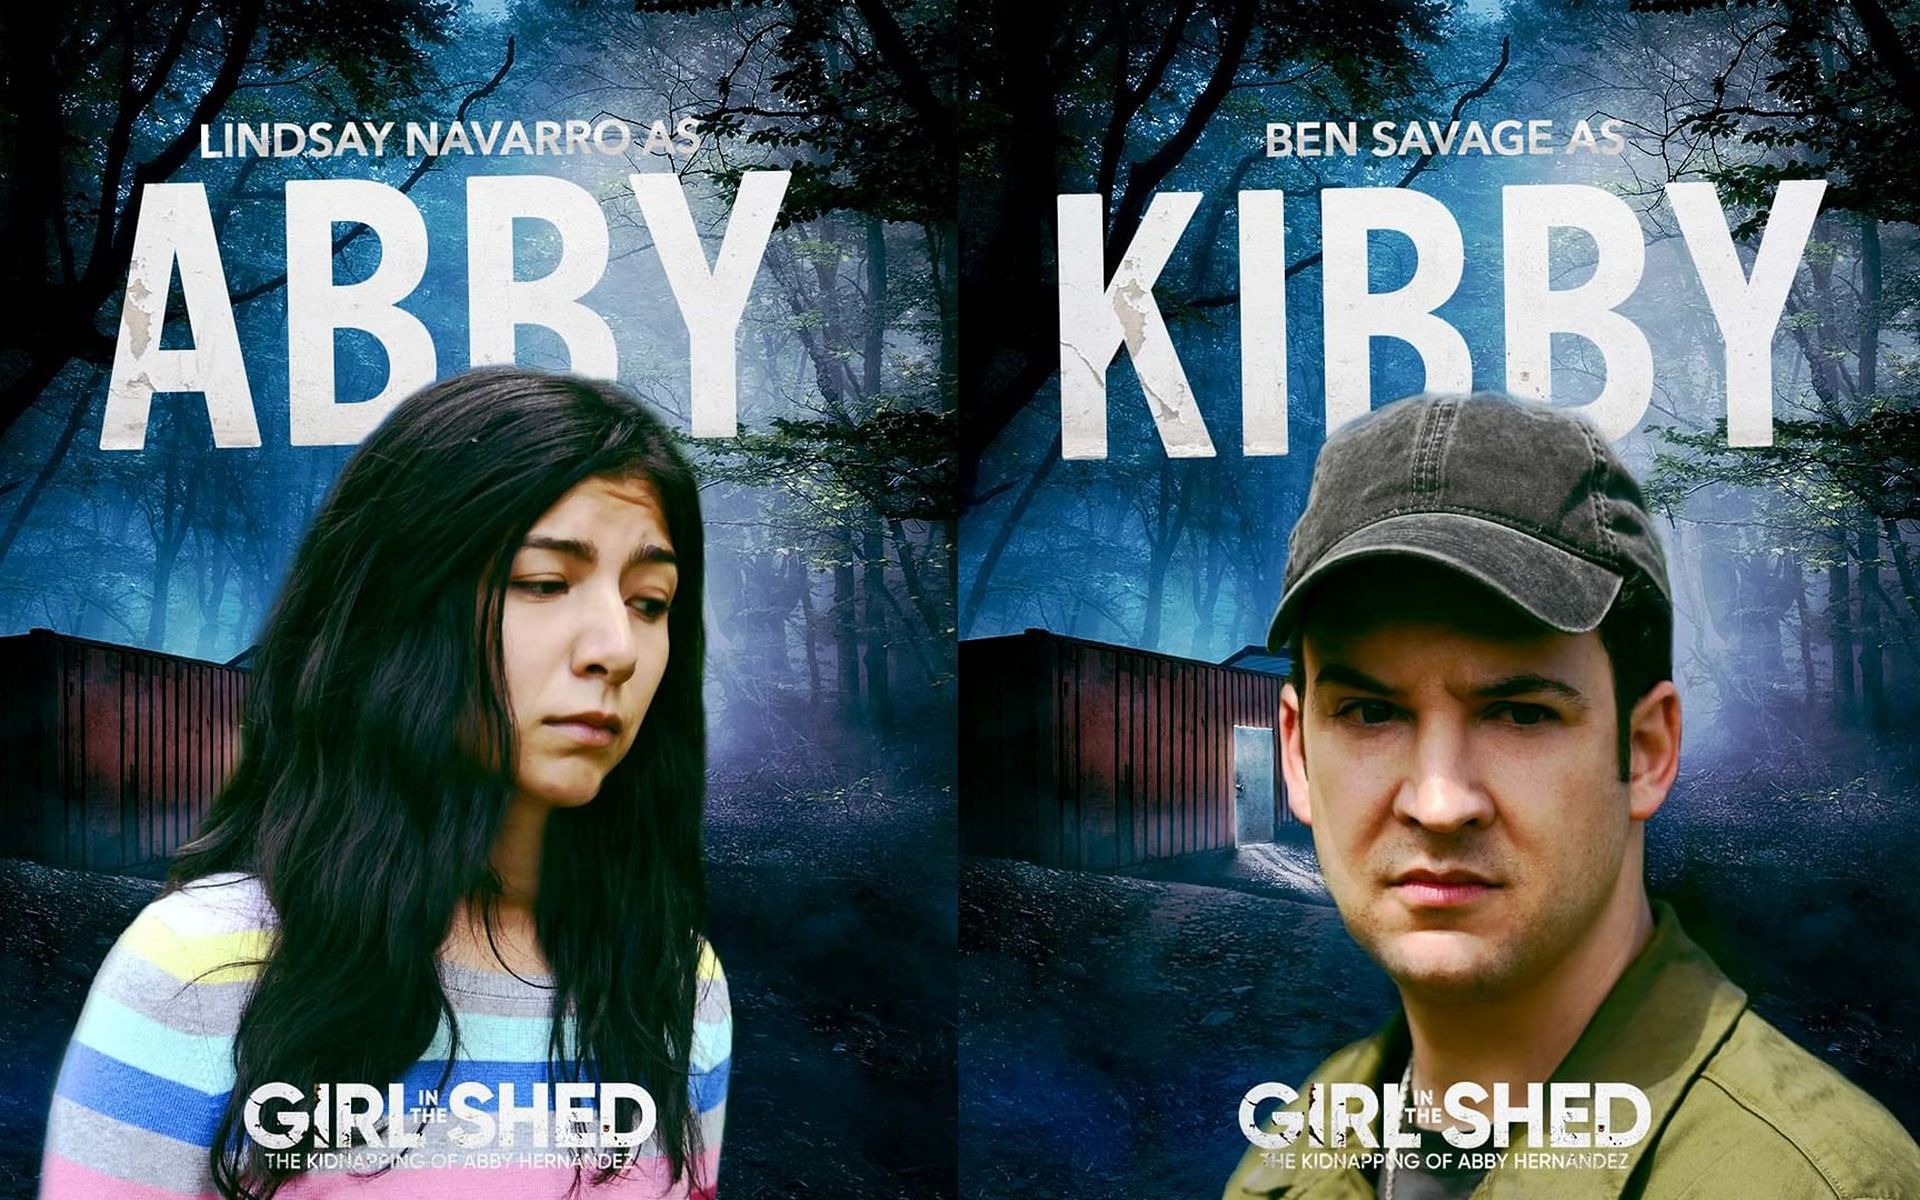 Promotional posters for Girl in the Shed: The Kidnapping of Abby Hernandez (Image via Sportskeeda)